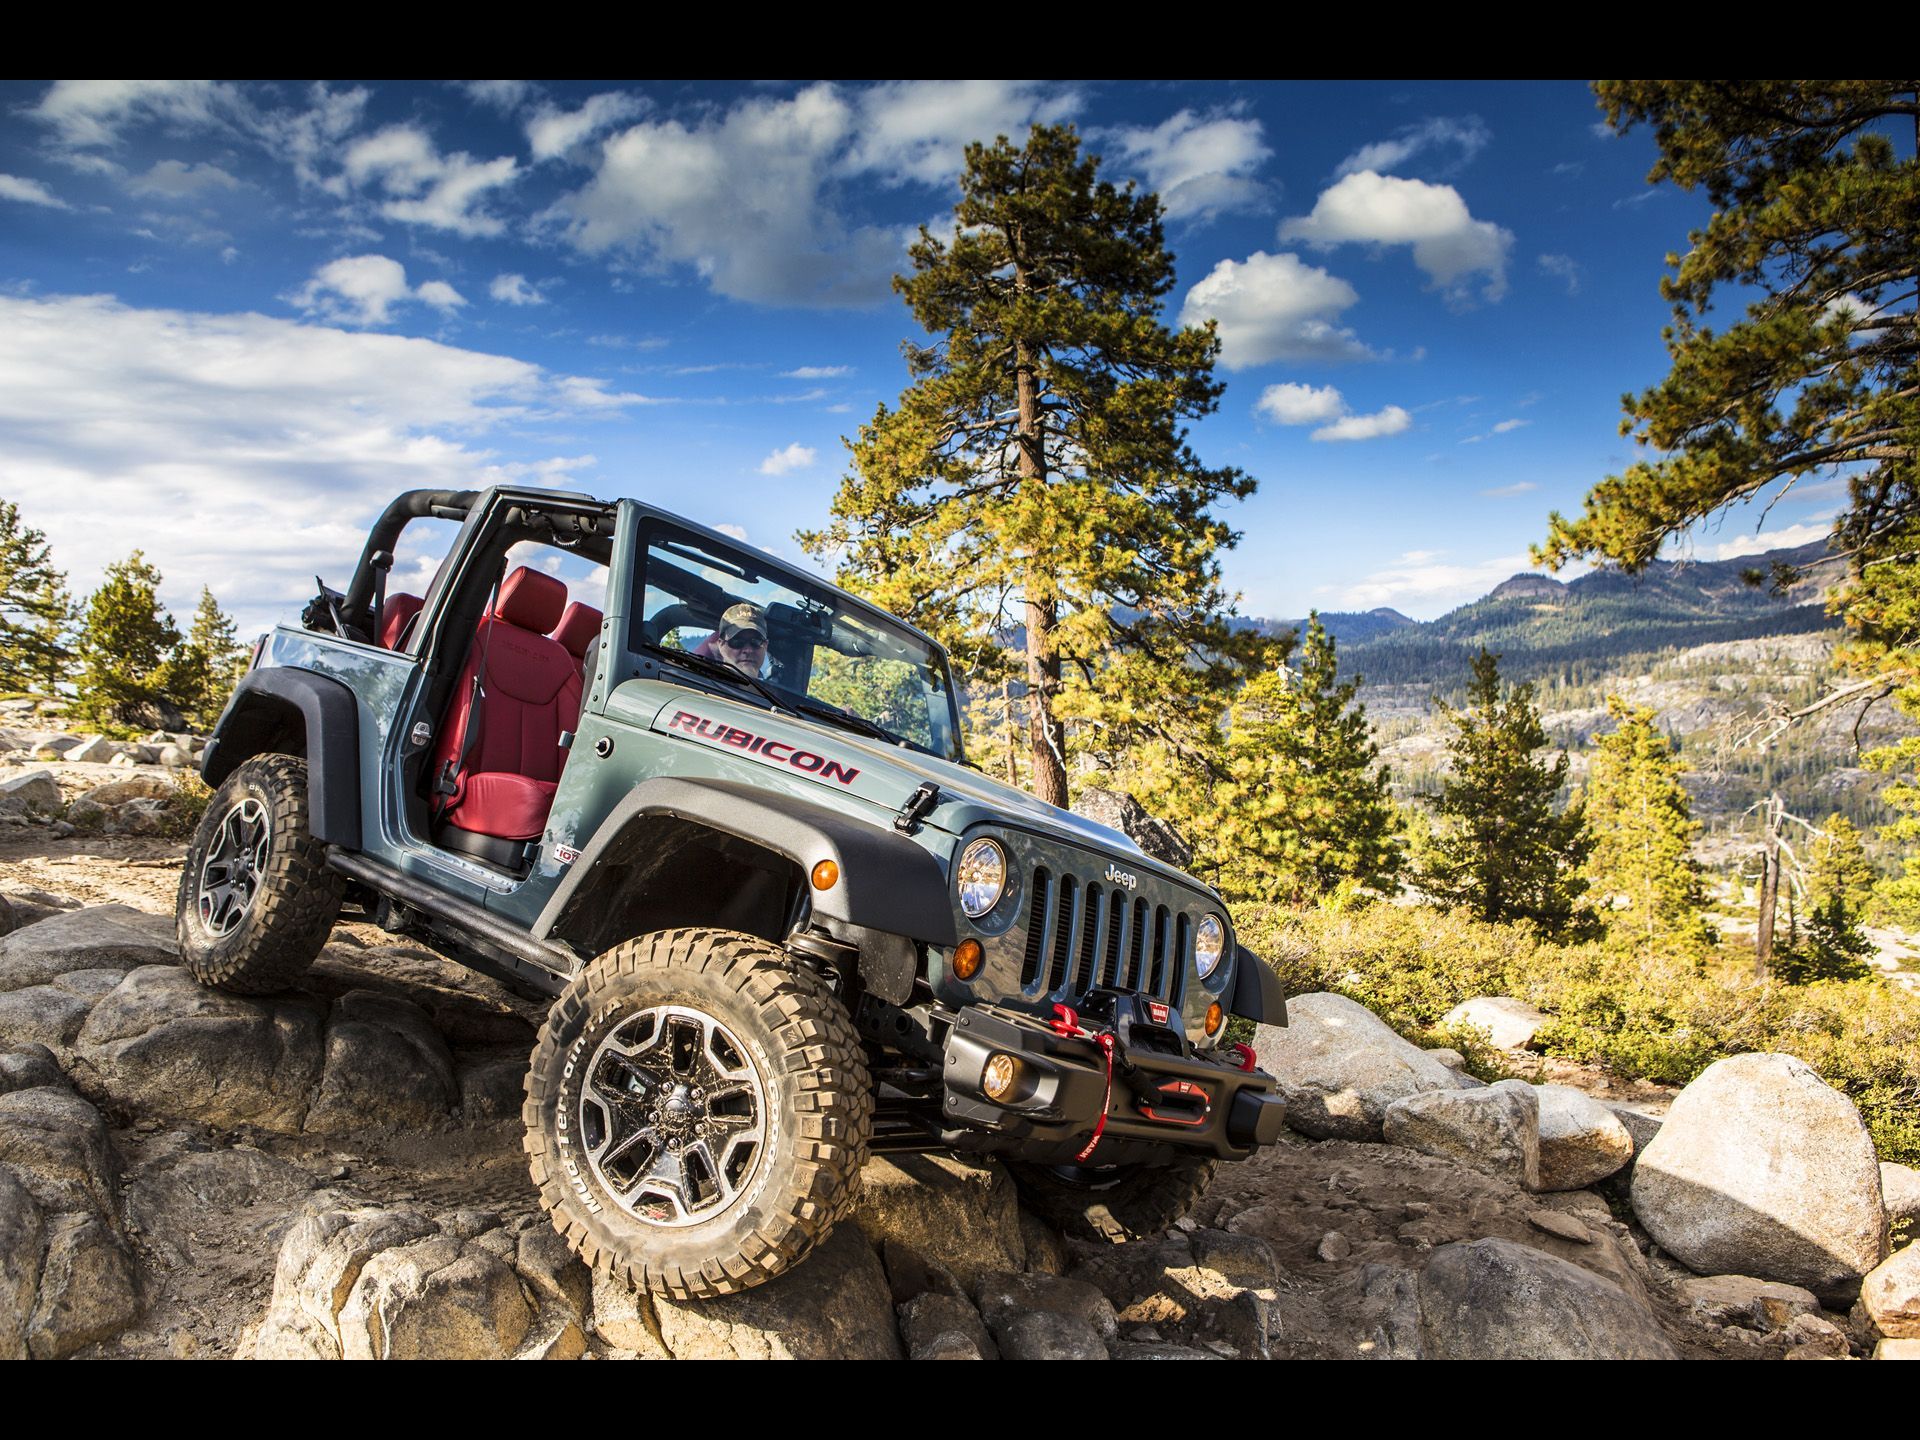 Jeep Wrangler Wallpaper HD Full HD Pictures